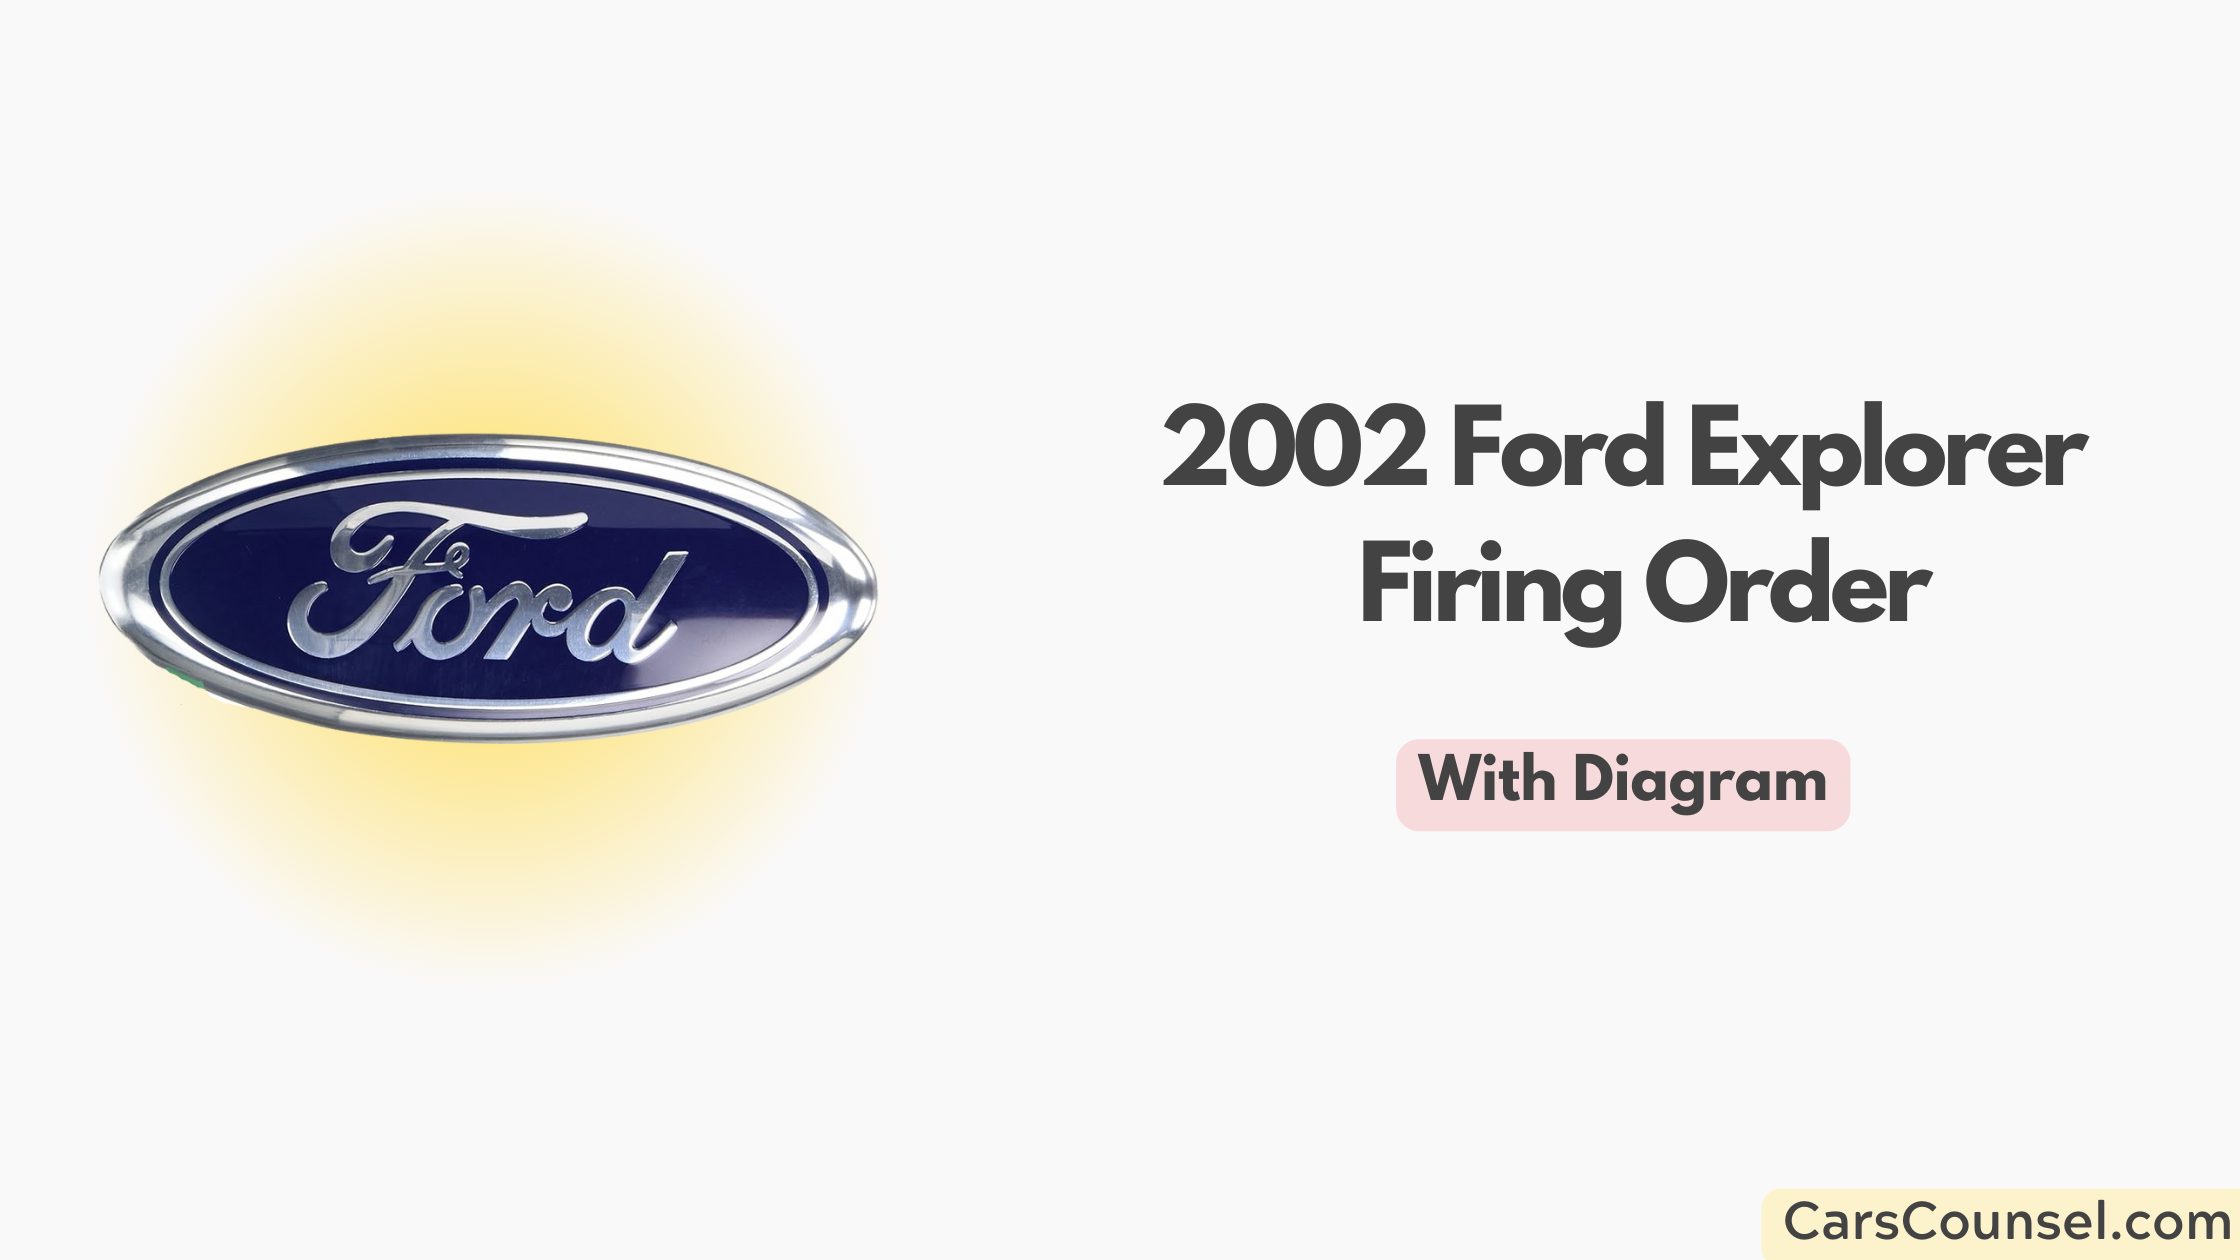 2002 Ford Explorer Iring Order With Diagram